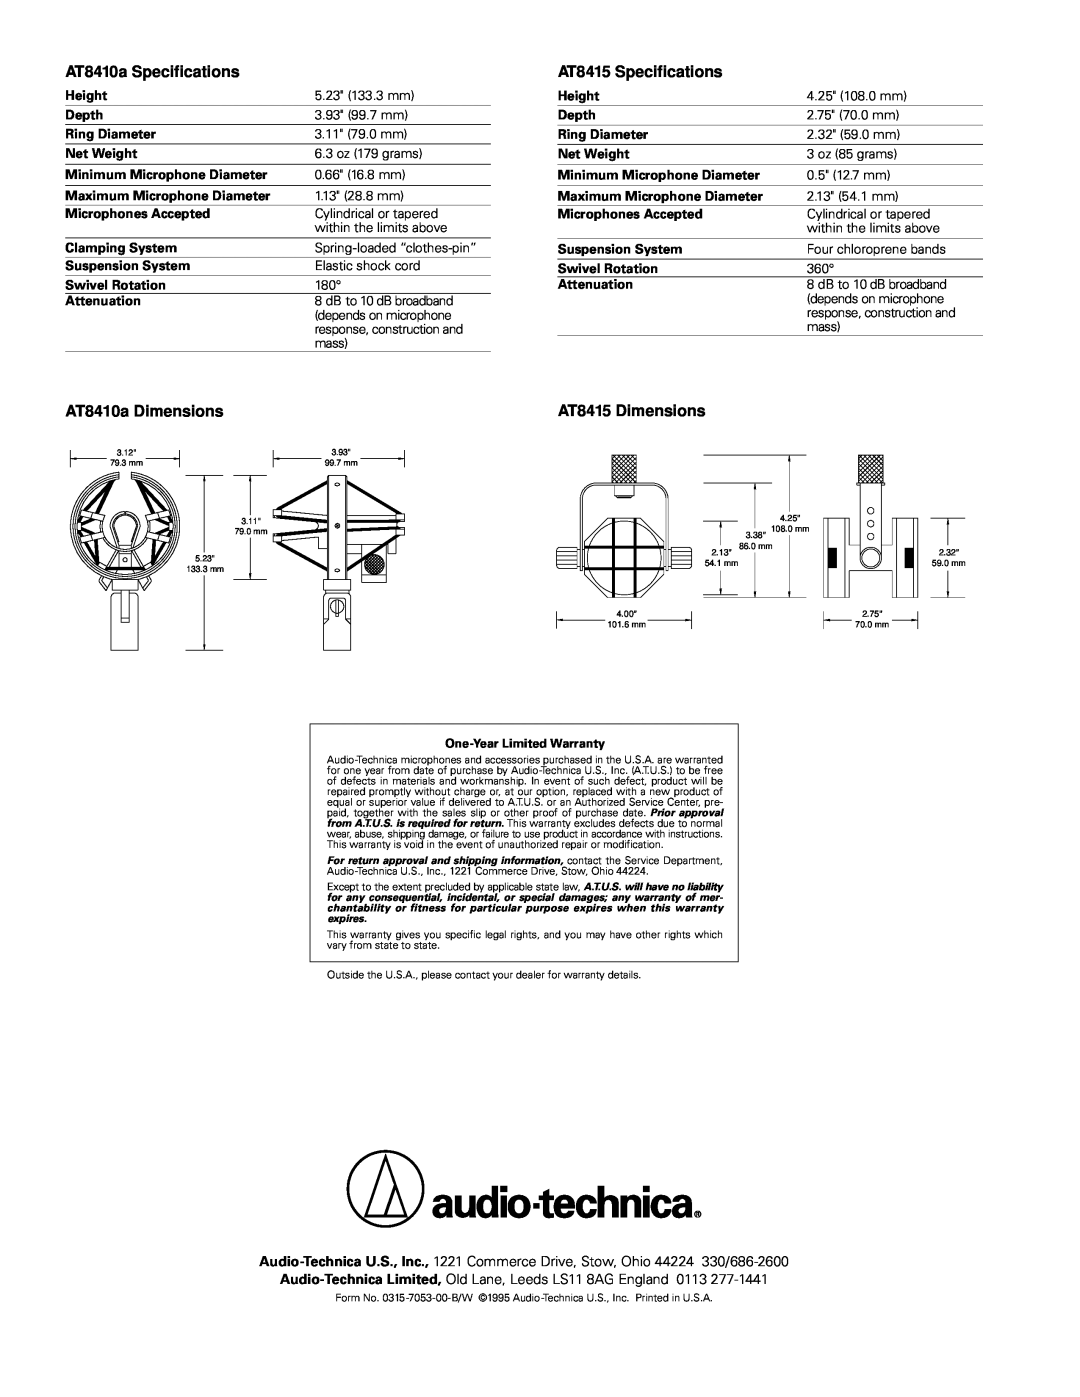 Audio-Technica manual AT8410a Specifications, AT8415 Specifications, AT8410a Dimensions, AT8415 Dimensions 